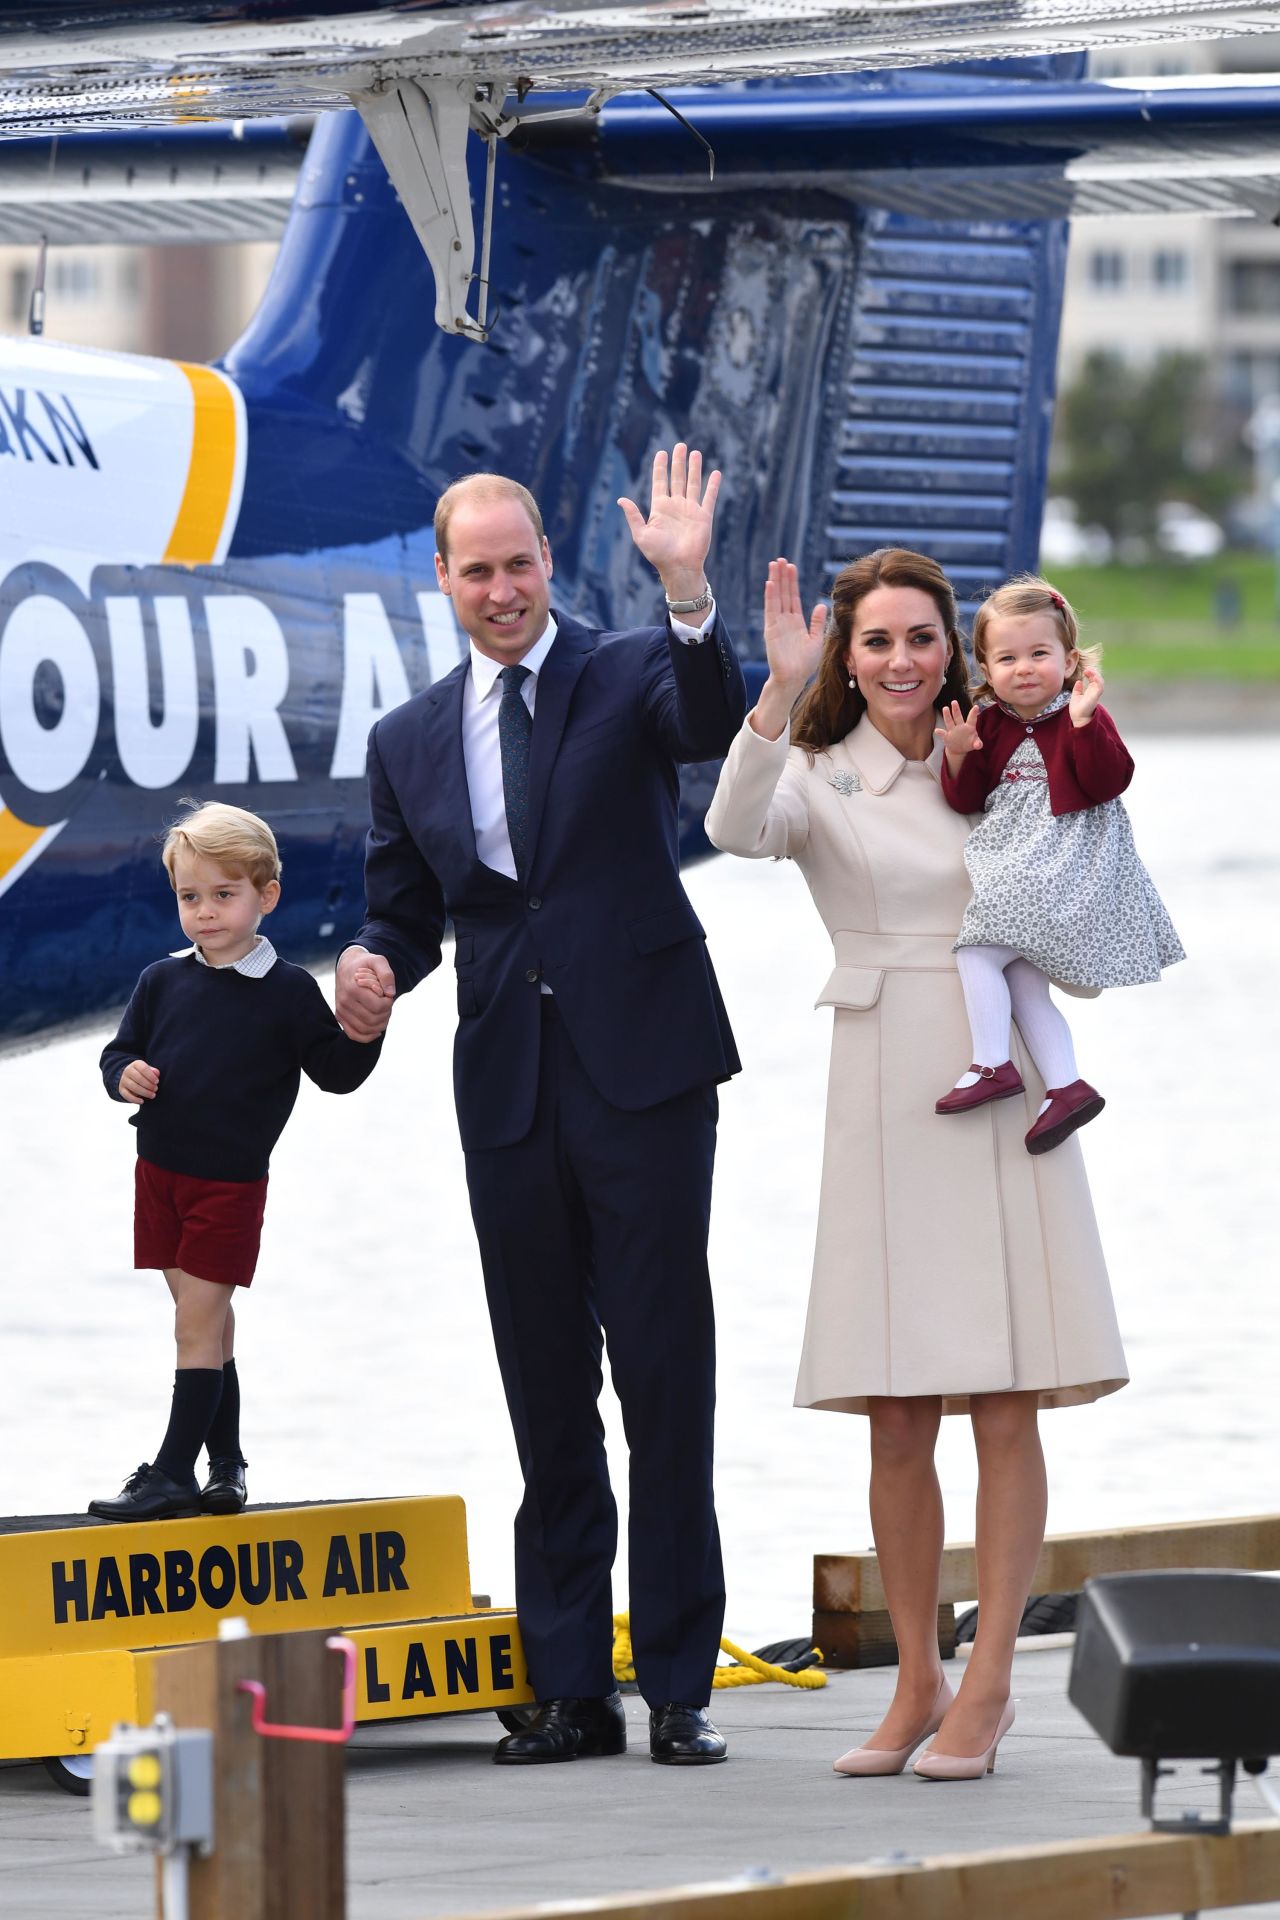 Charlotte is held by her mother as her family ends <a href="http://www.cnn.com/2016/09/24/world/gallery/royals-visit-canada-sept-2016/index.html" target="_blank">an eight-day tour of Canada</a> in October 2016. At left is her brother and her father.